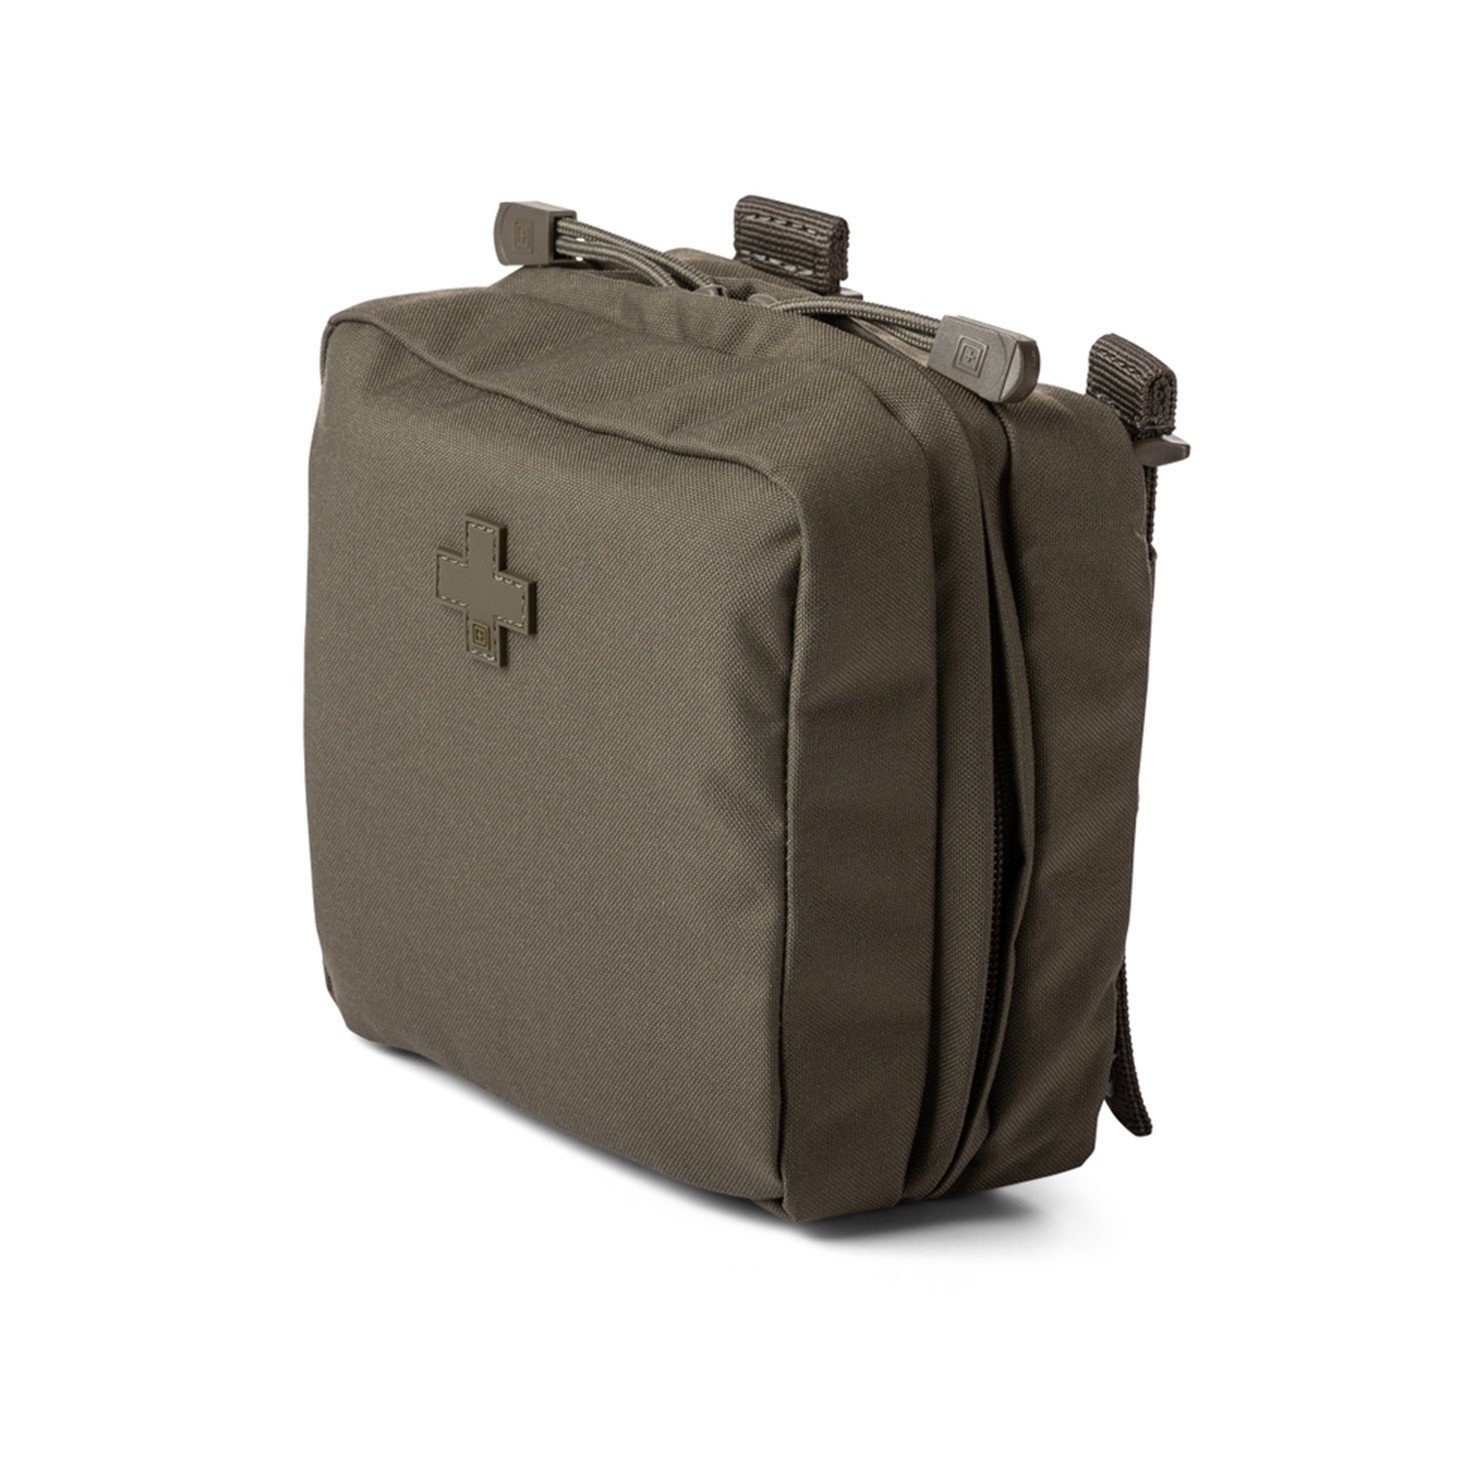 5.11 Tactical 6 x 6 Med Pouch